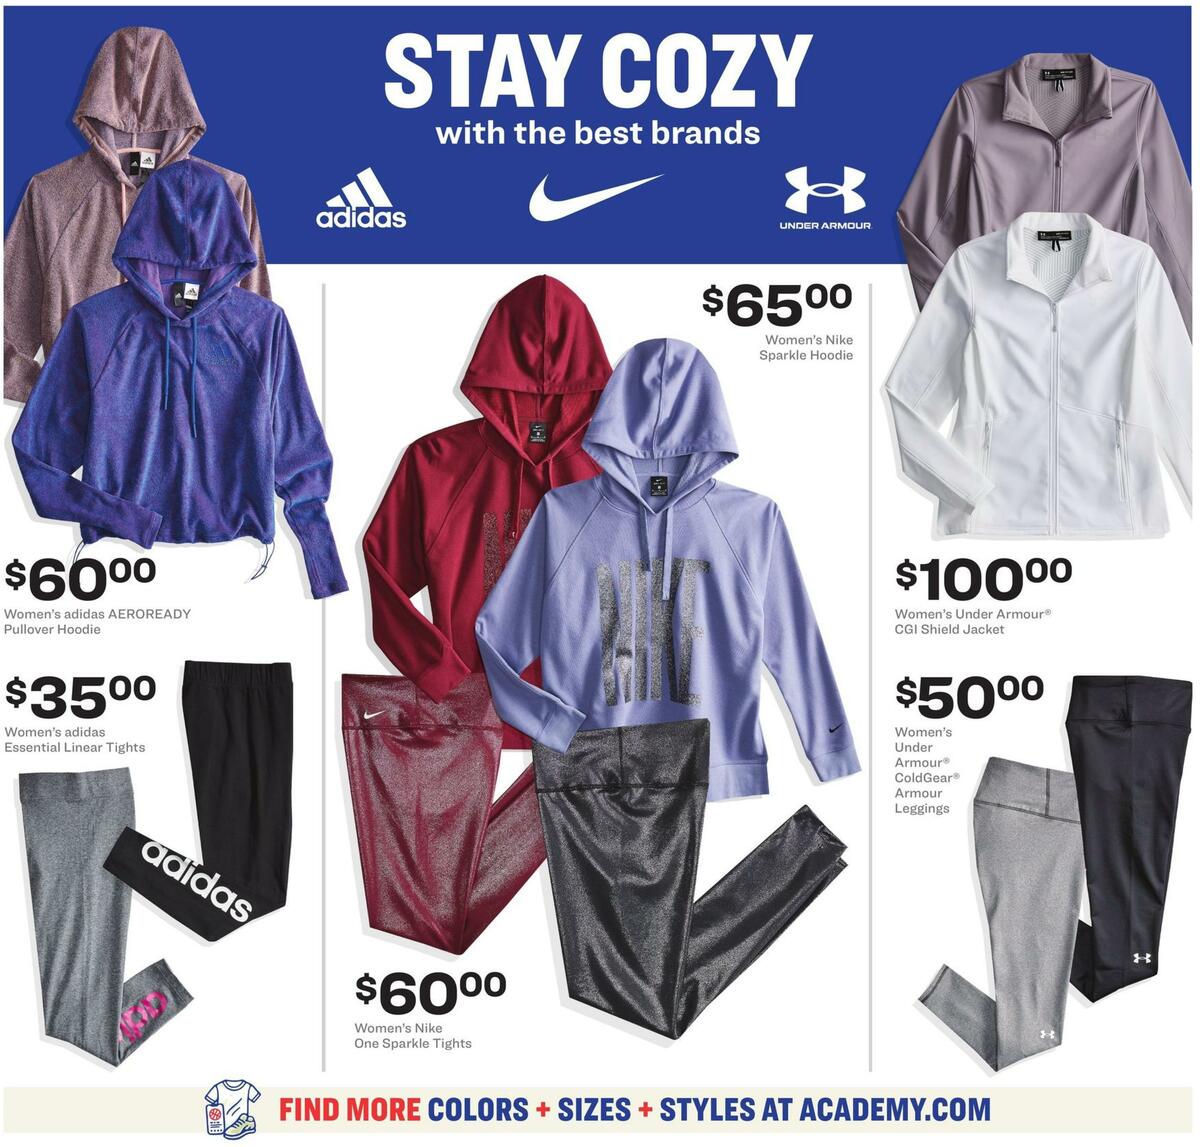 Academy Sports + Outdoors Weekly Ad from December 26